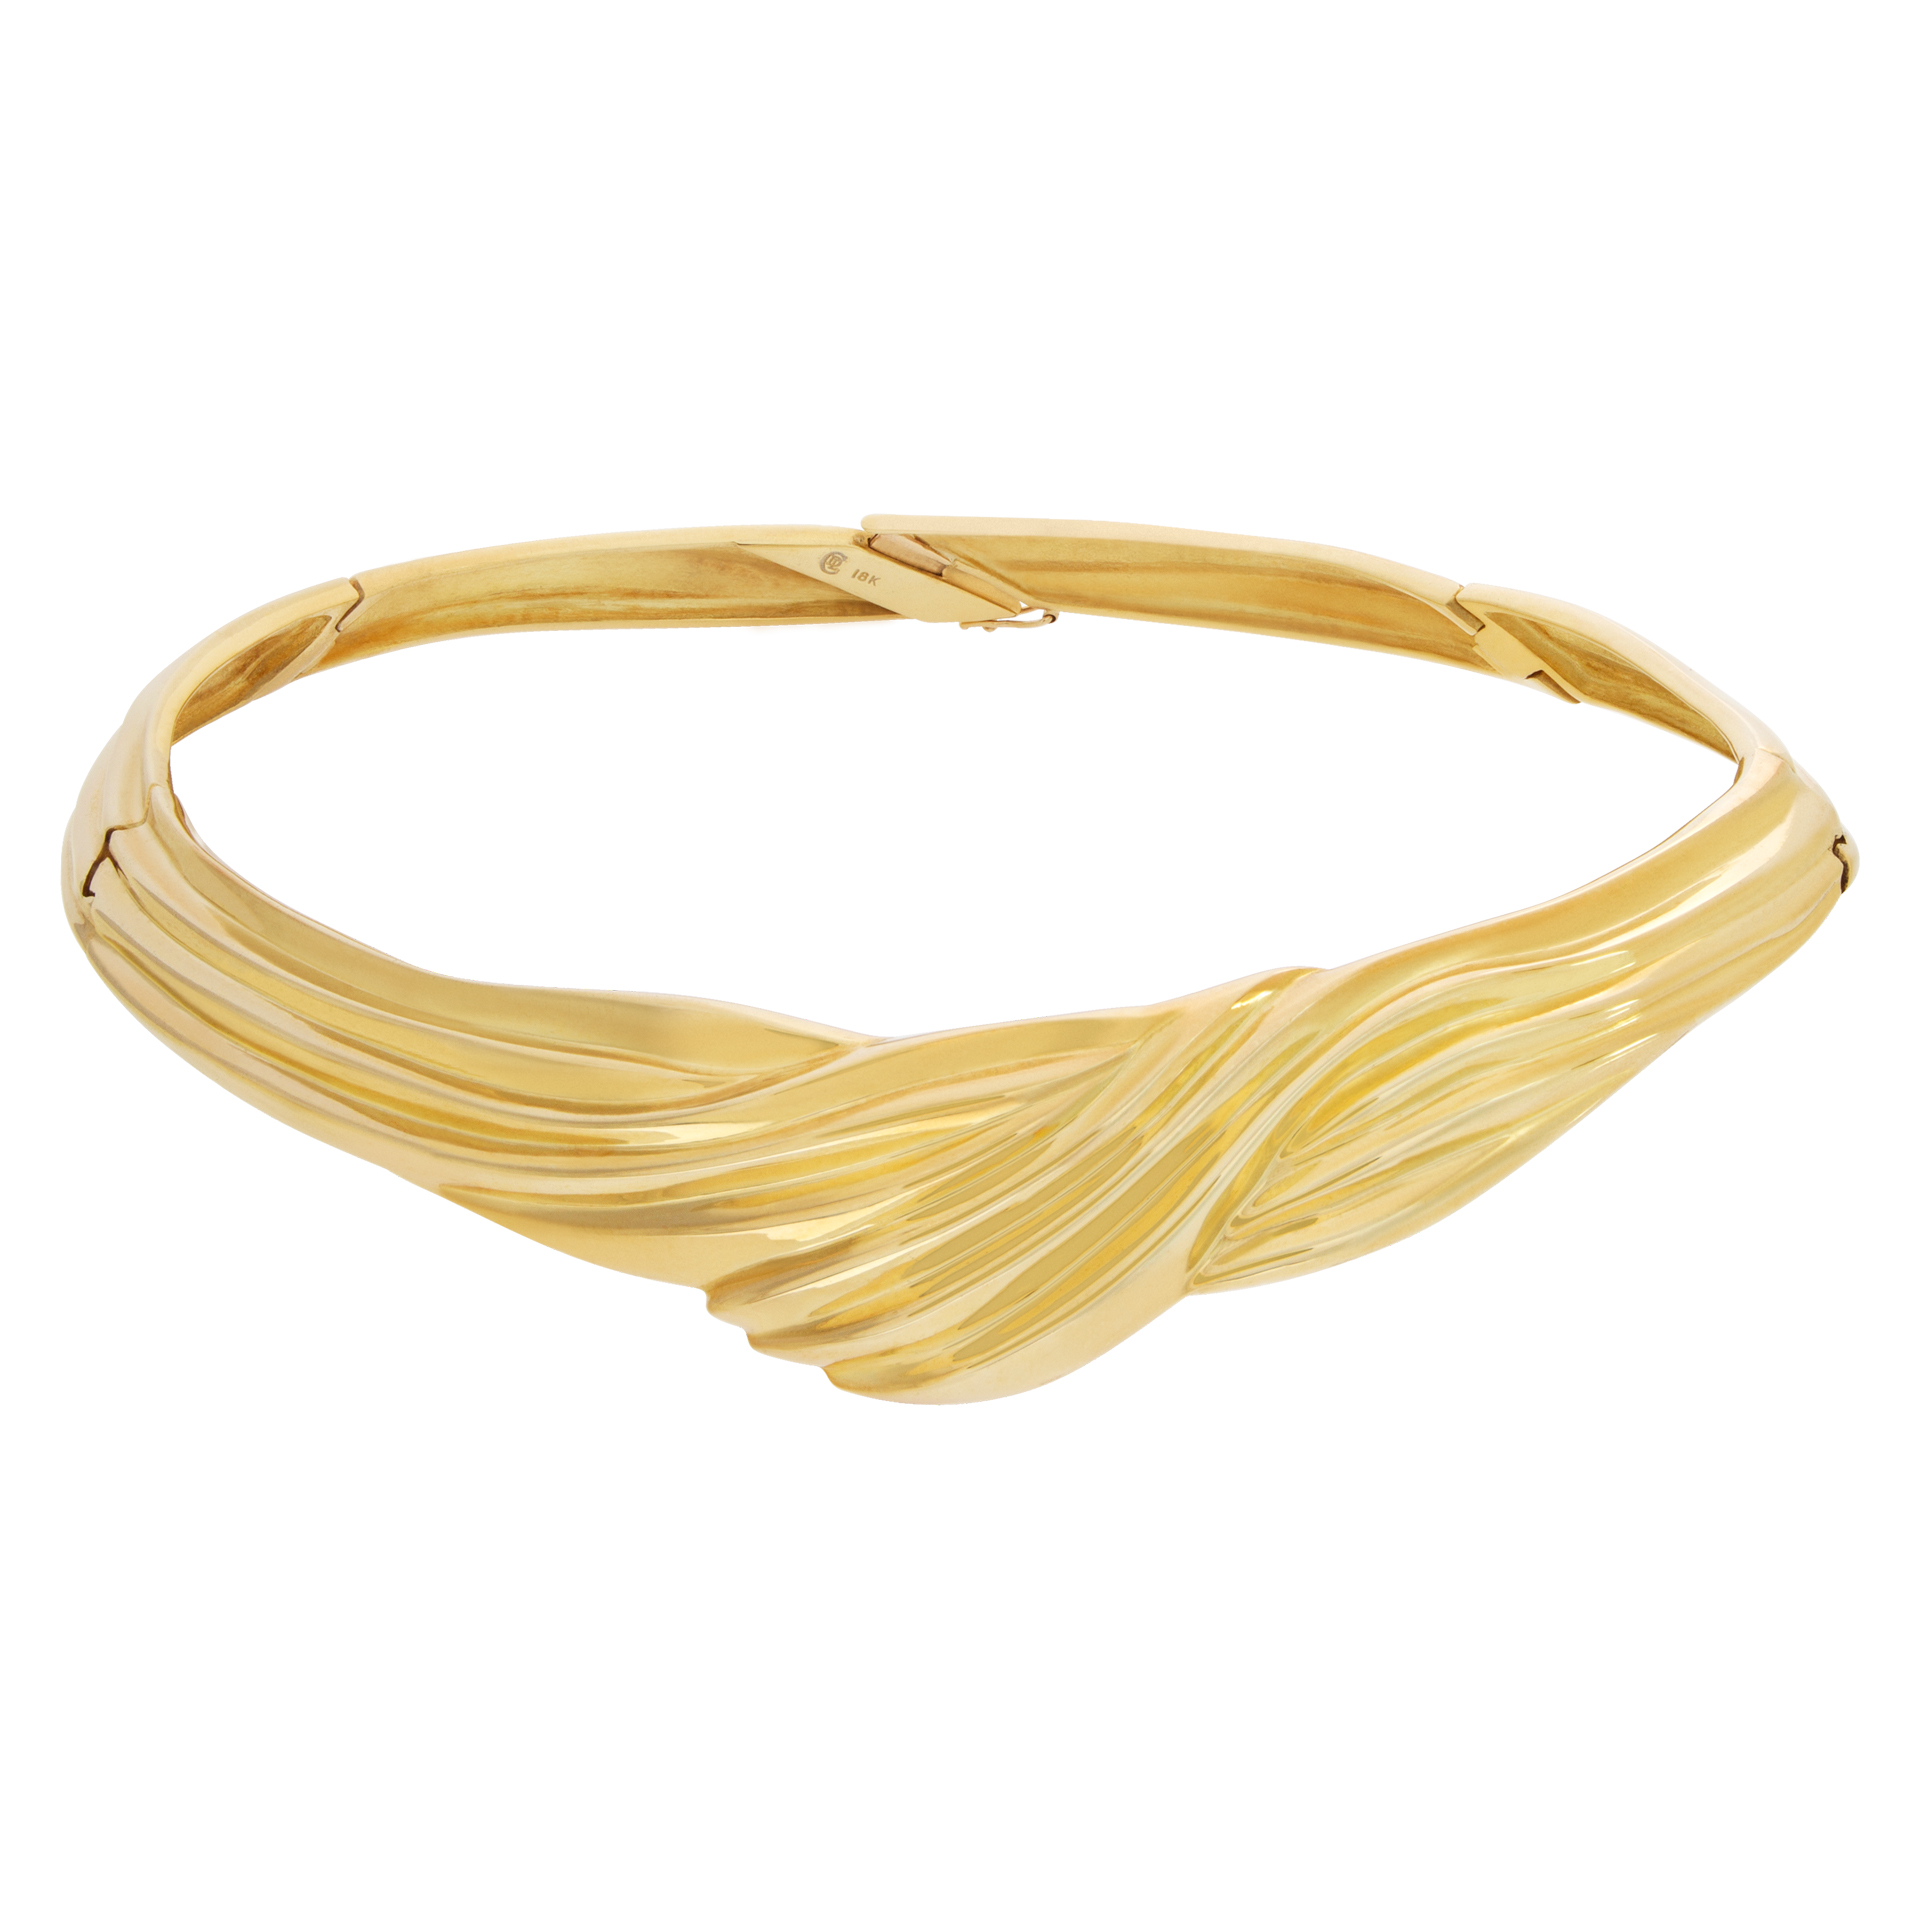 Stylish stiff choker in 18k yellow gold with twisted center design.